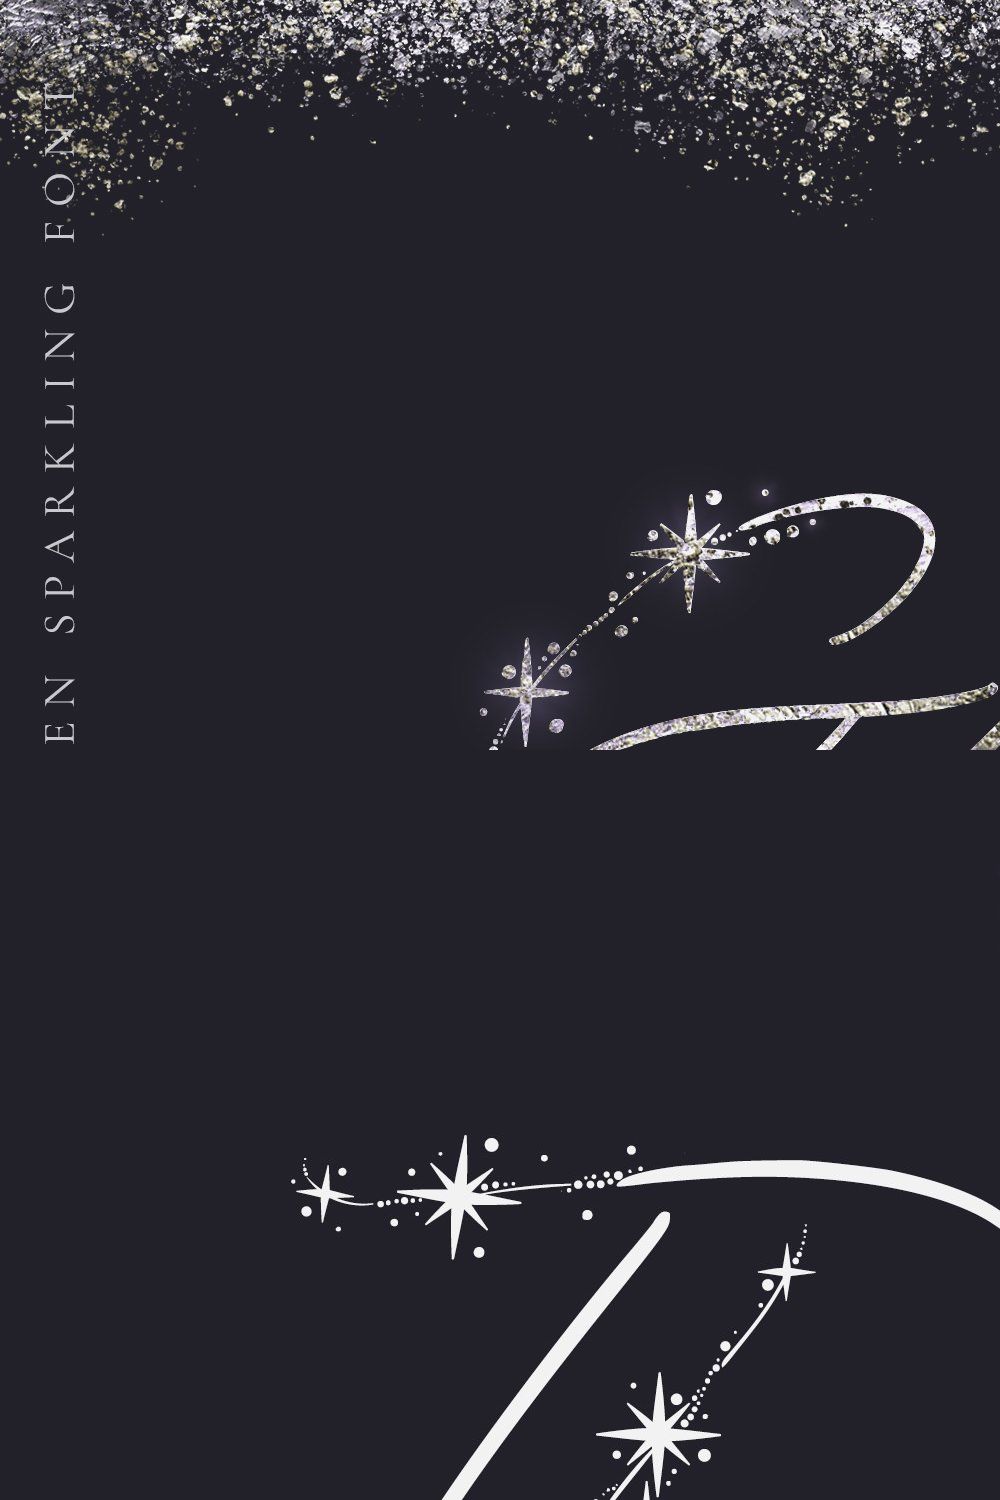 Glitter. Festive font with sparks pinterest preview image.